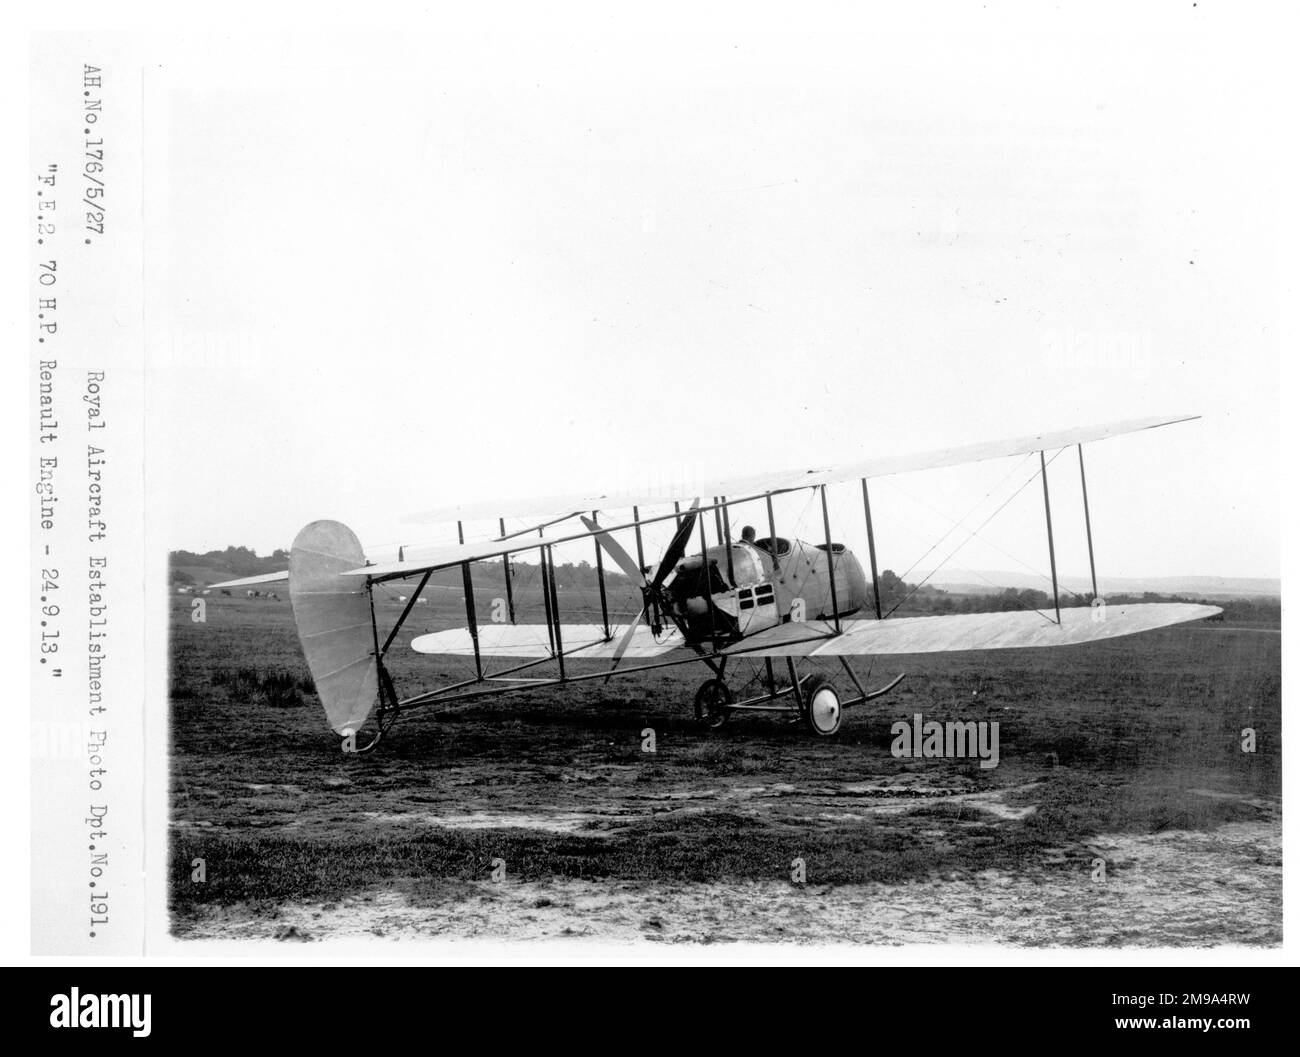 Royal Aircraft Factory F.E.2, powered by an air-cooled 70hp Renault V-8 engine, (R.A.F. - Royal Aircraft Factory), (F.E. - Farman Experimental). This was the second F.E.2, with revised tail surfaces and the outer wings copied from the B.E.2. Neither of the two F.E.2s were fitted with fins, which, unsurprisingly led to instability in yaw, which brought about its end on 23 February 1914, when it span to the ground killing Ronald Kemps passenger. Stock Photo